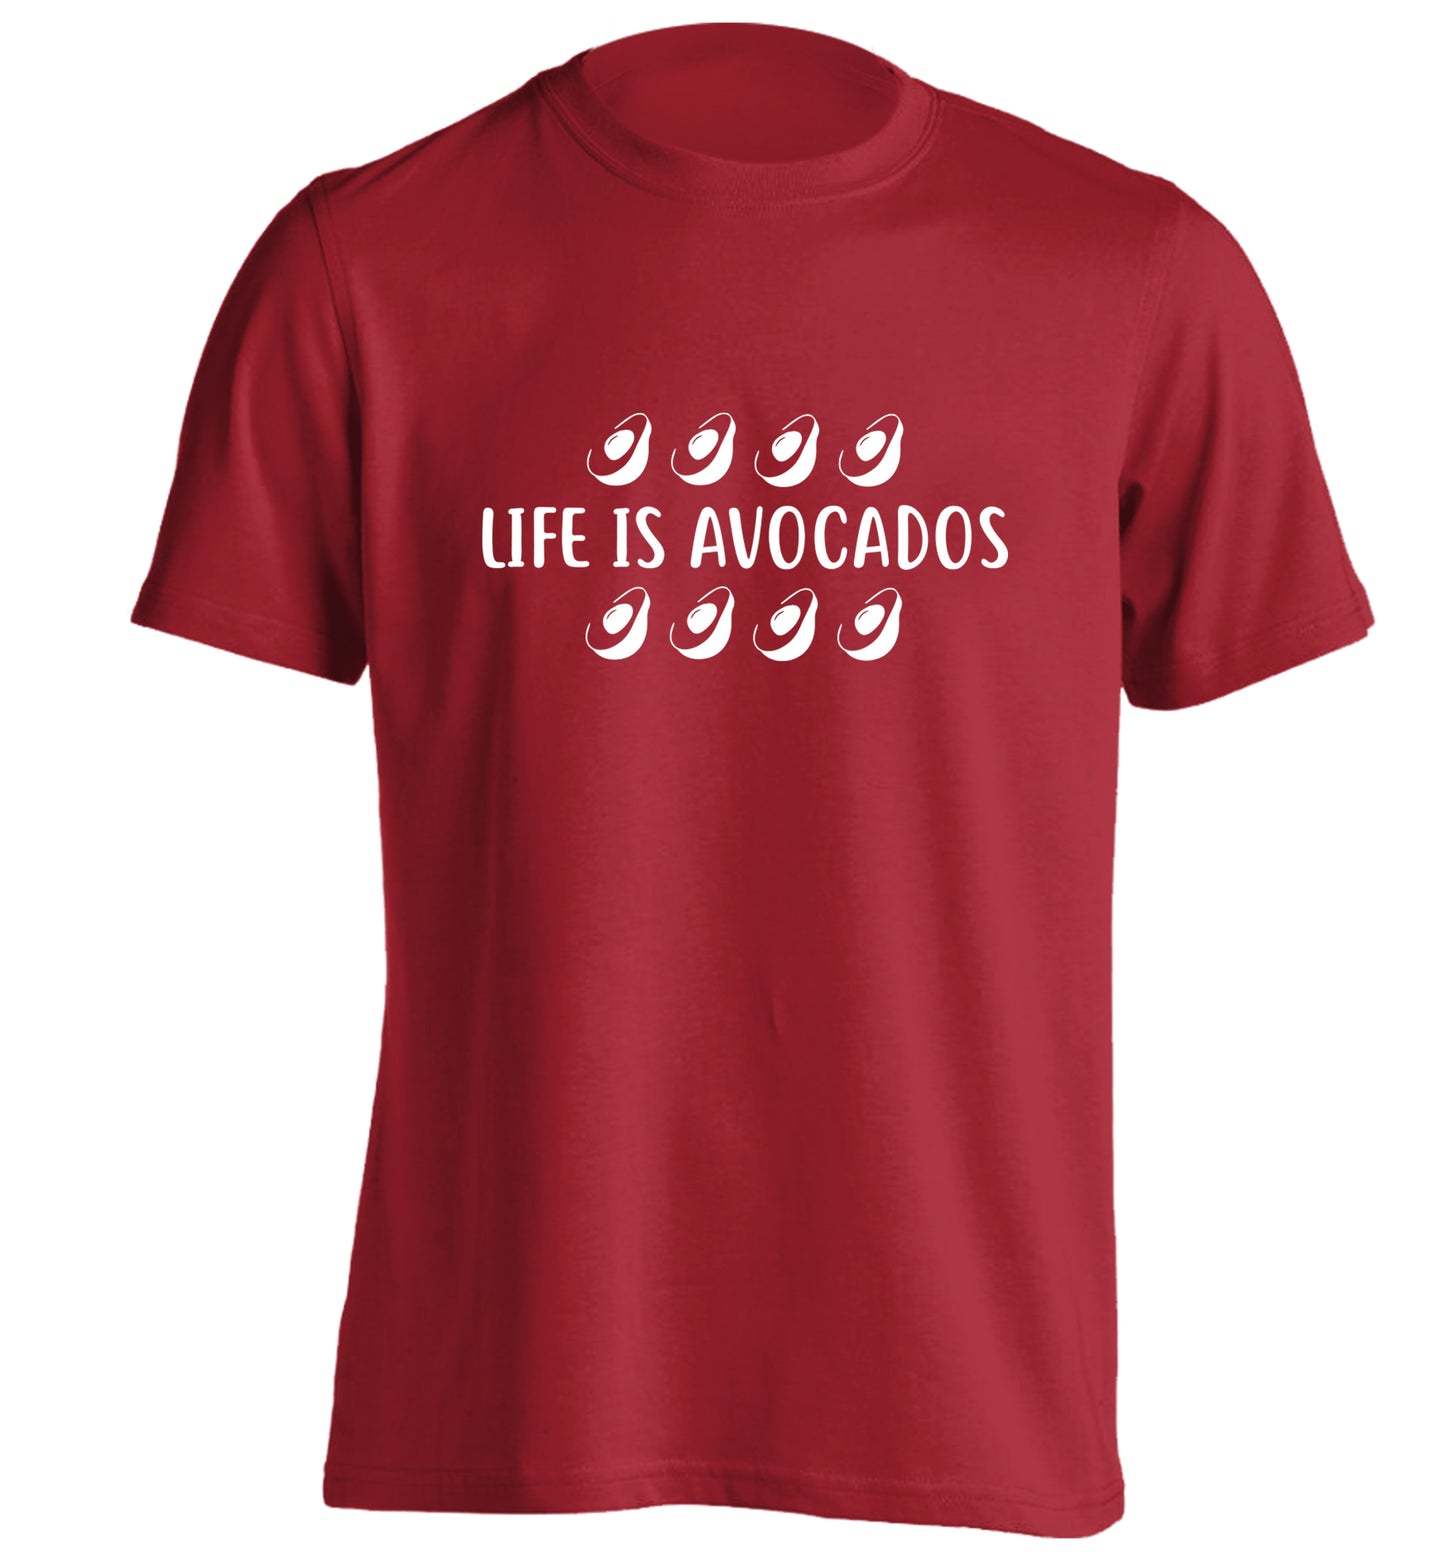 Life is avocados adults unisex red Tshirt 2XL